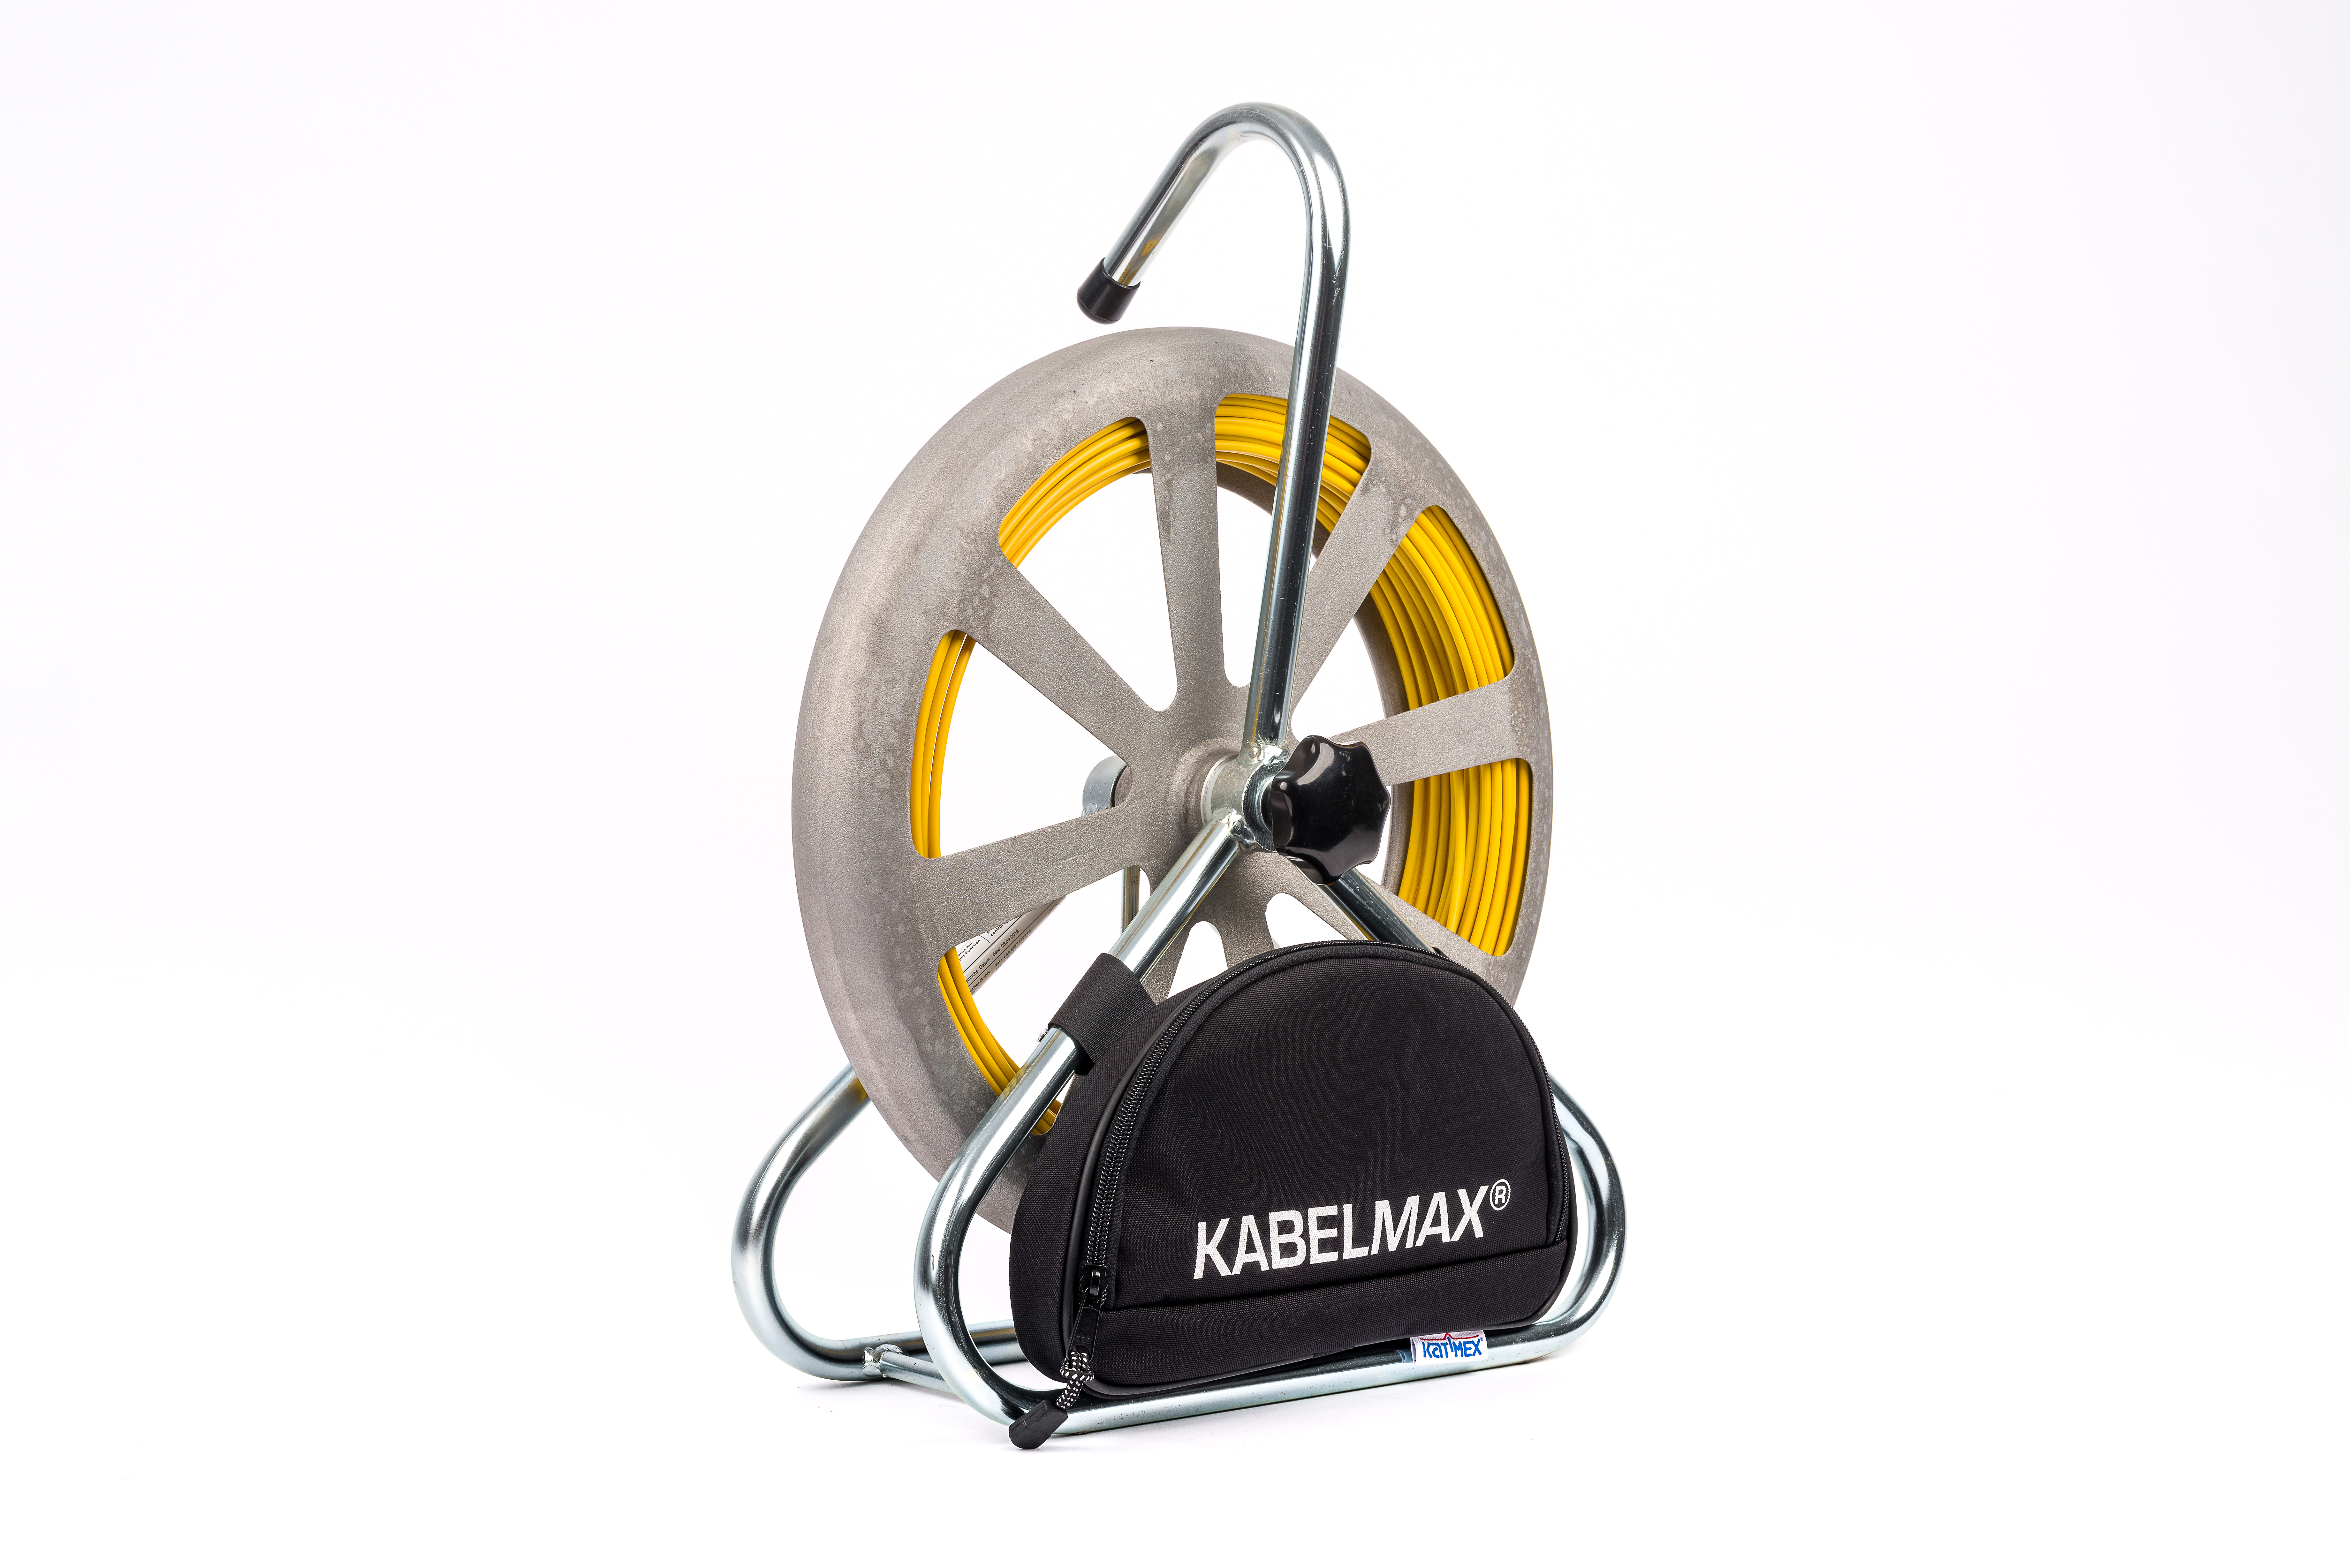 cablemax-with-service-bag-and-accessories